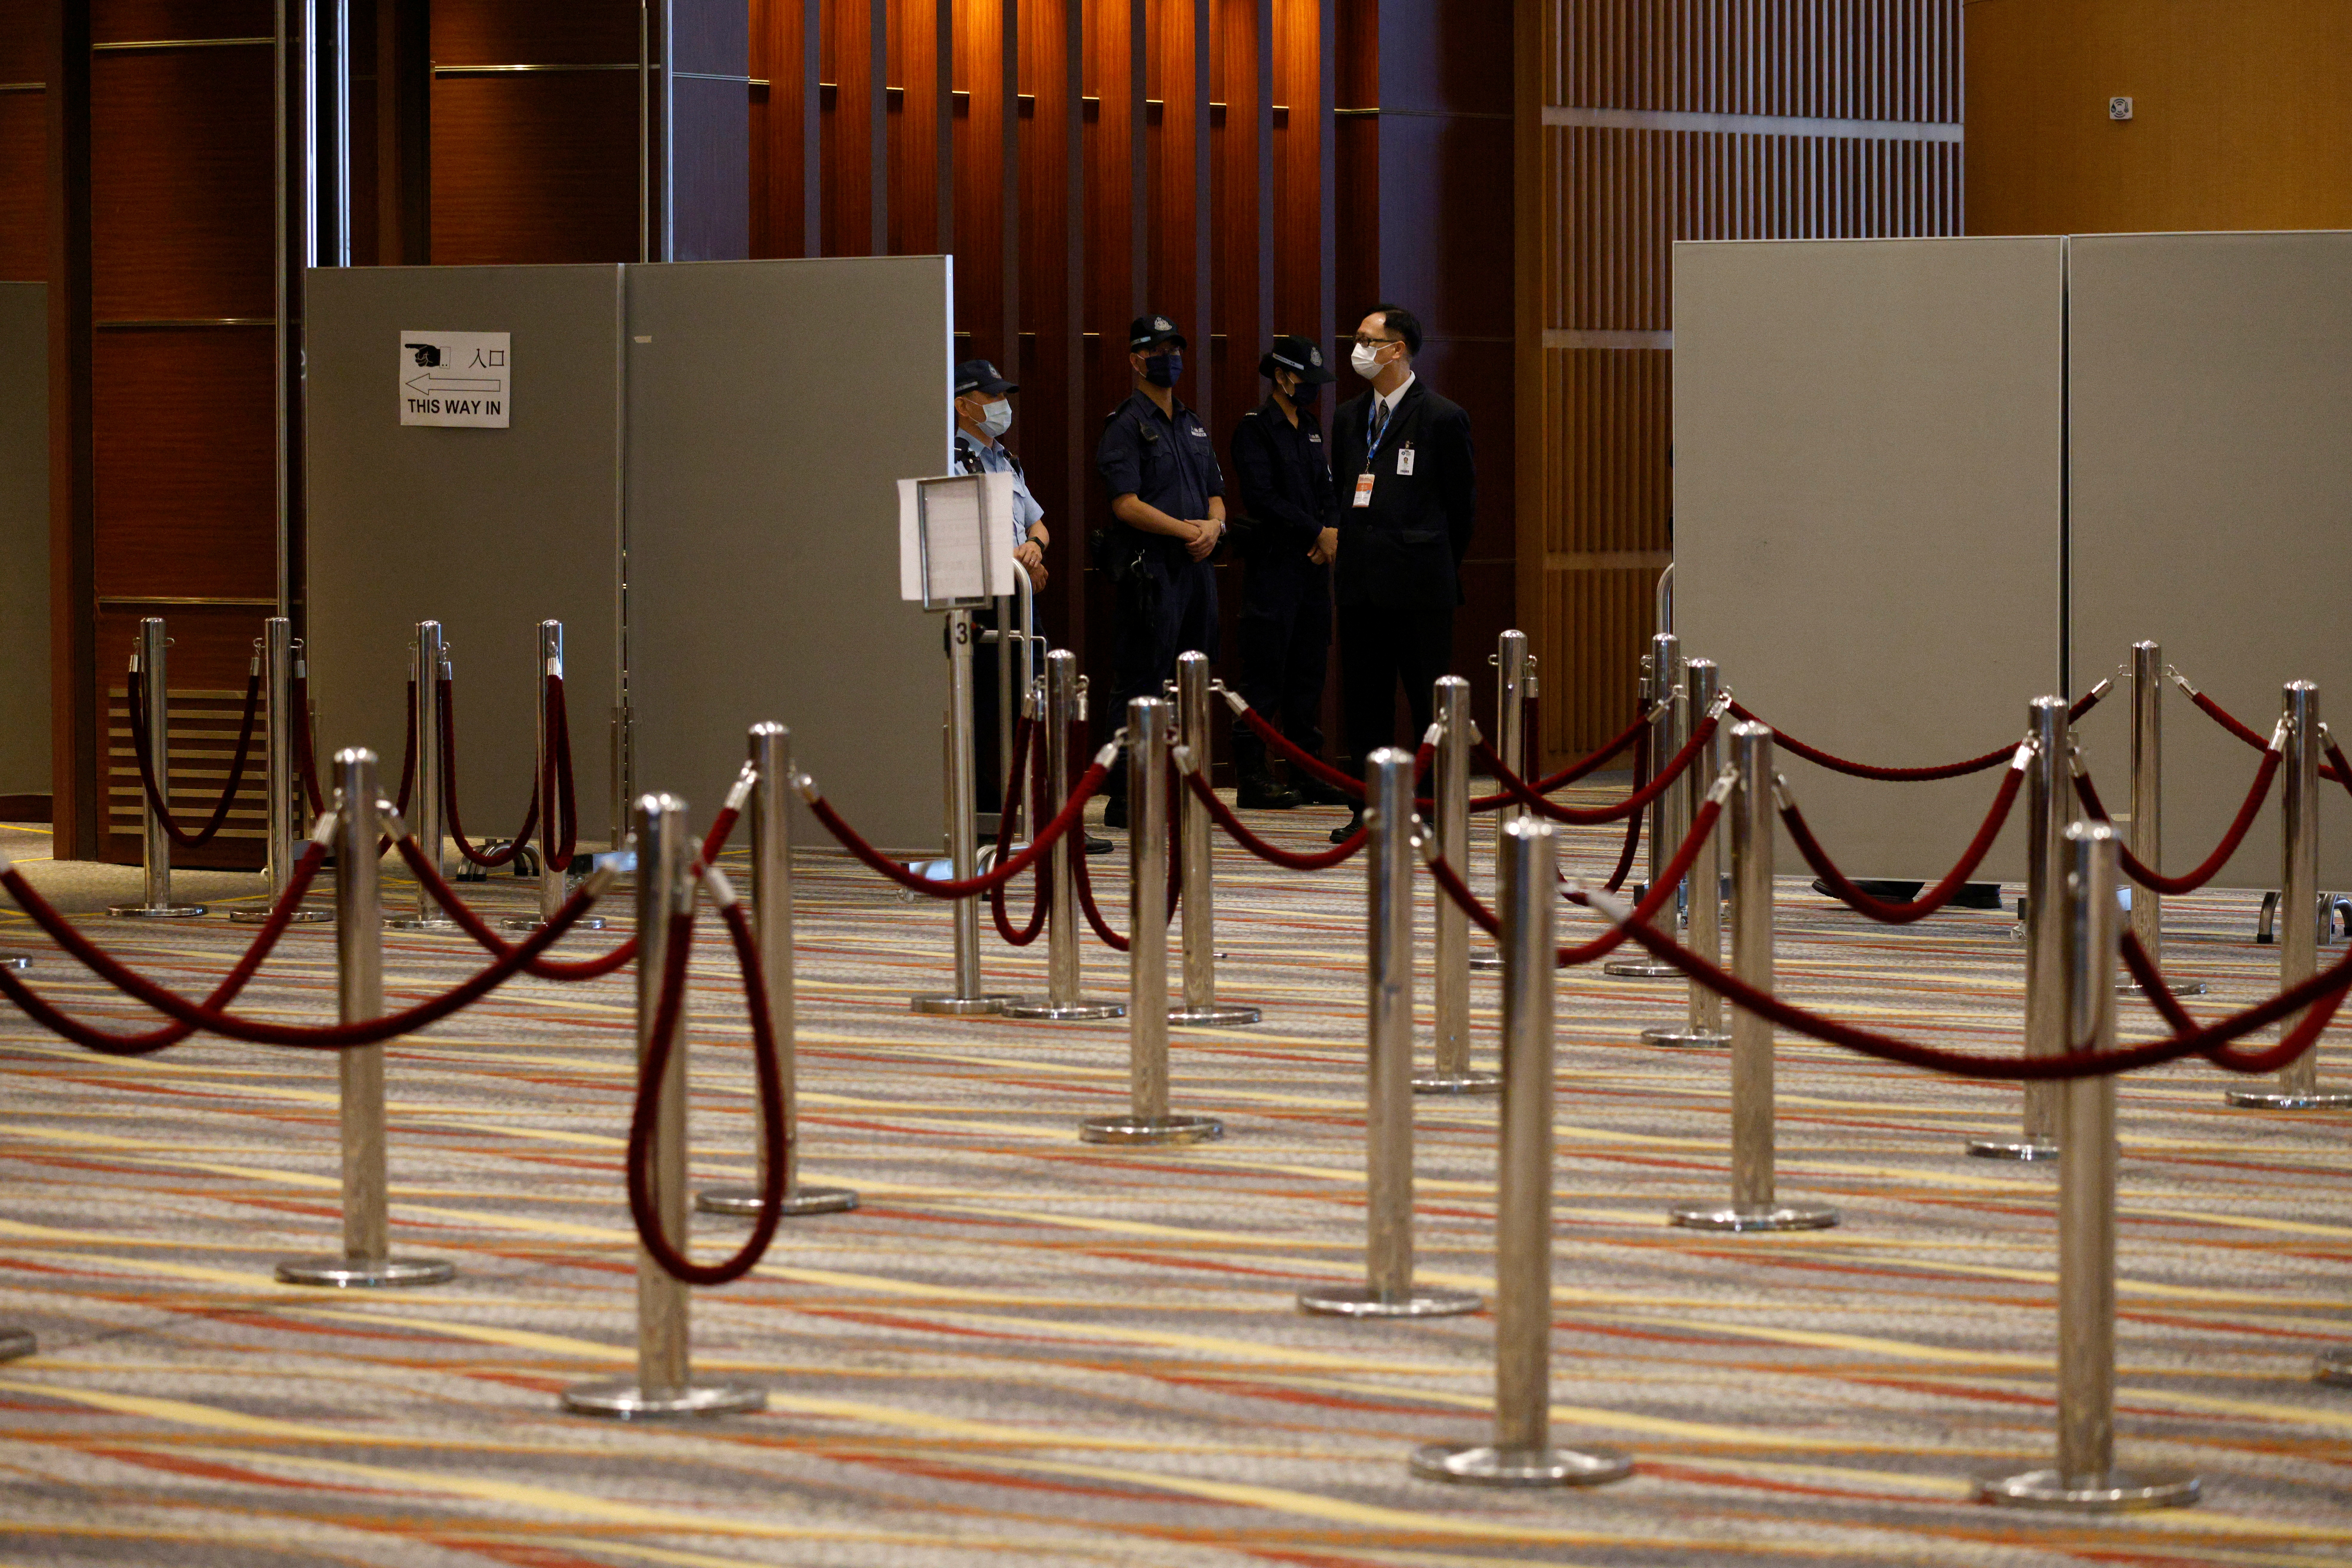 Police stand guard at a polling station during voting of the election committee, in Hong Kong